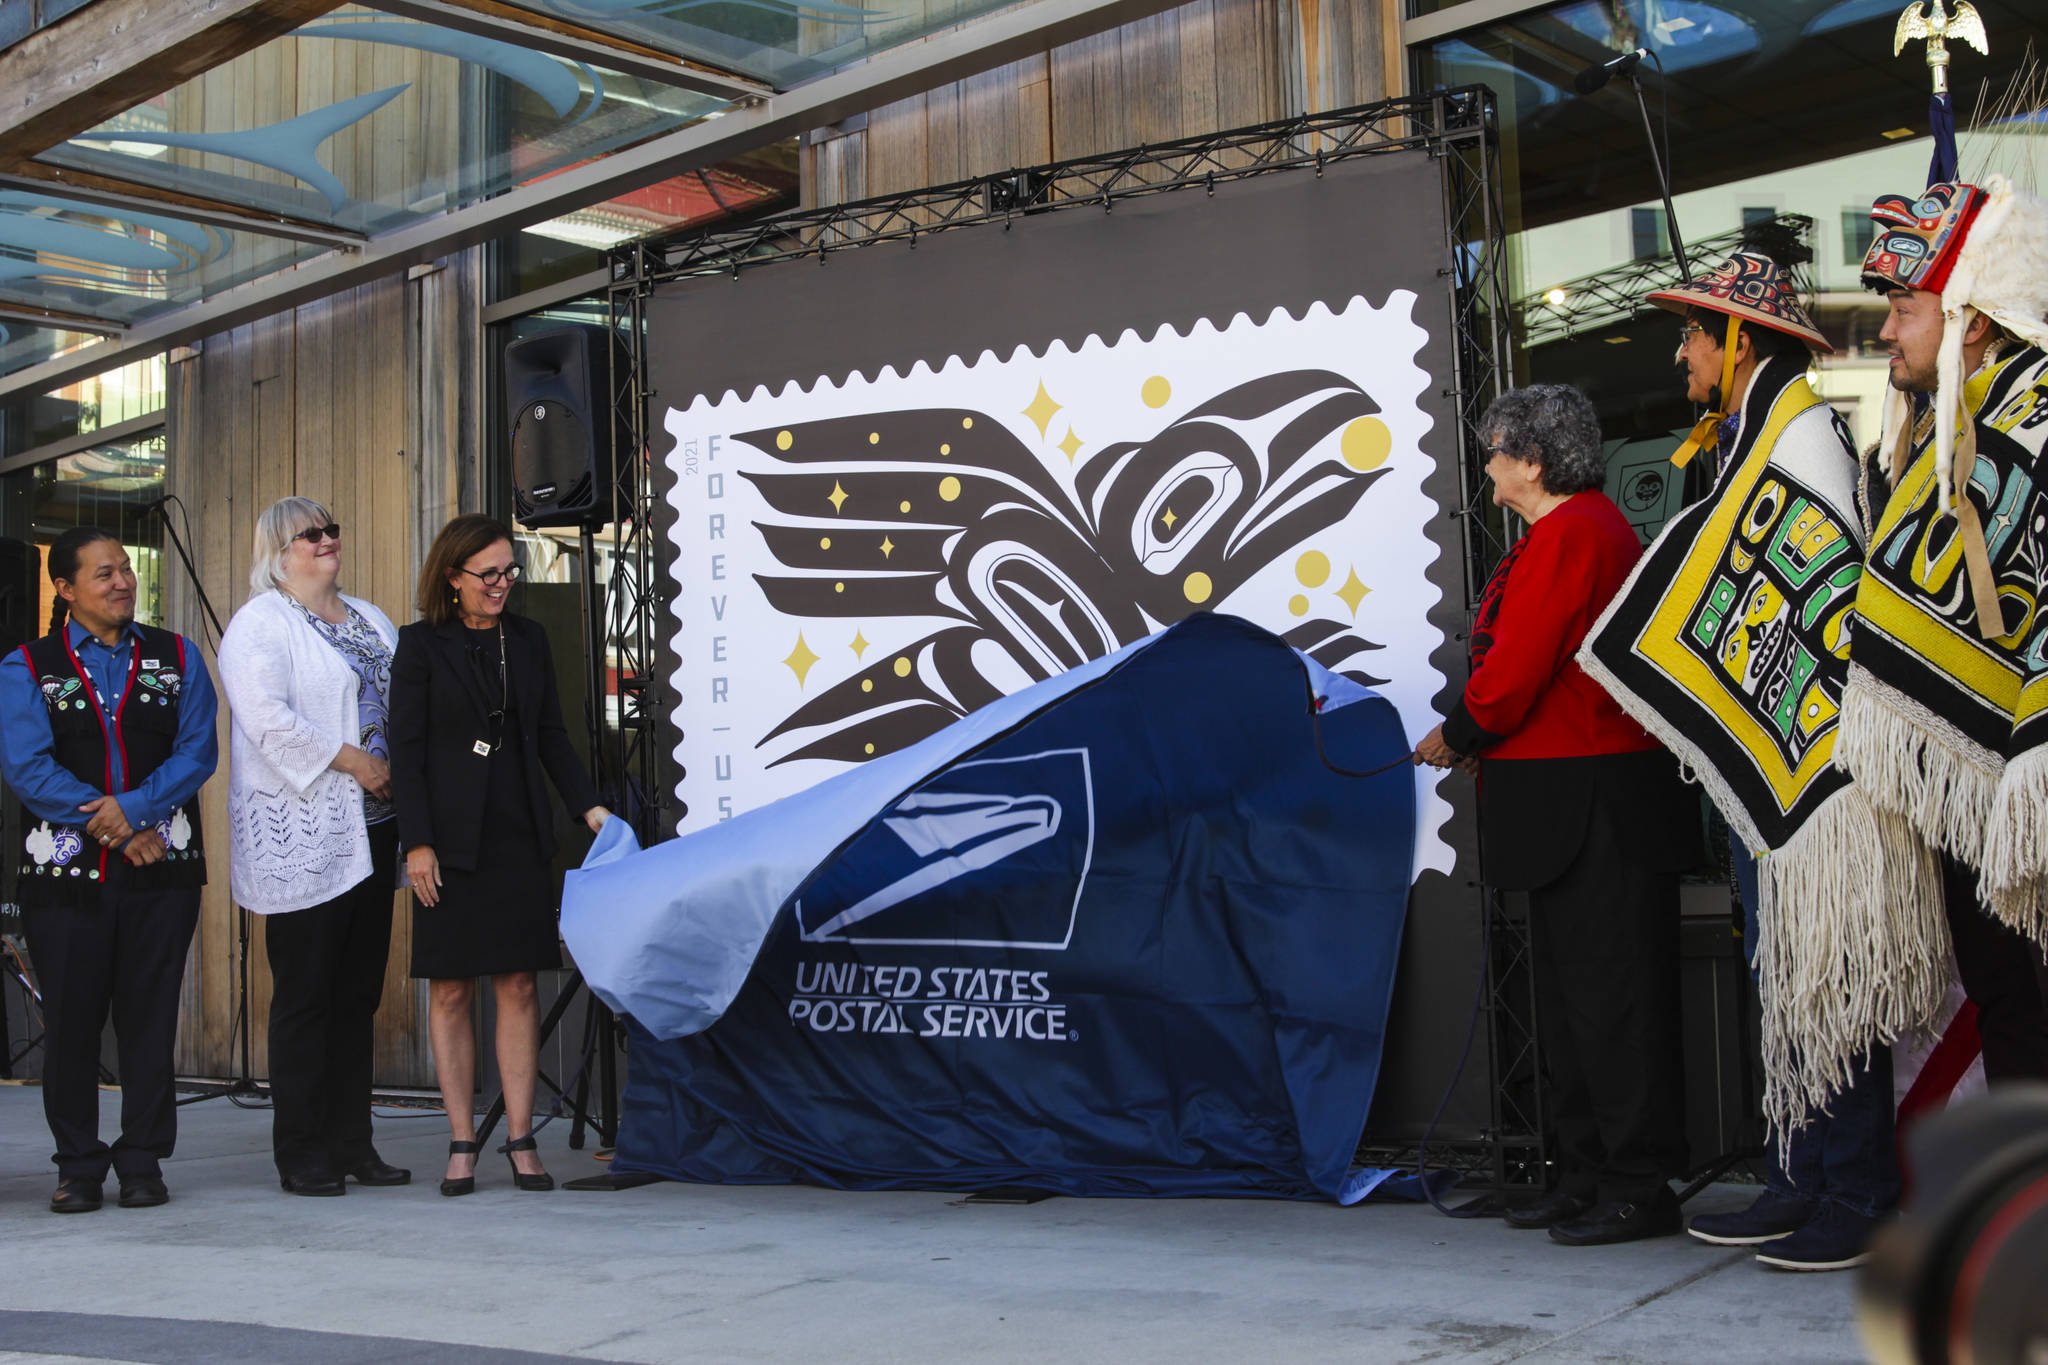 Michael S. Lockett / Juneau Empire
Officials, artists and key Southeast Alaska figures alongside U.S. Postal Service leadership unveil the Raven Story stamp as part of the official release ceremony in front of the Sealaska Heritage Institute’s Walter Soboleff Building on Friday, July 30, 2021.